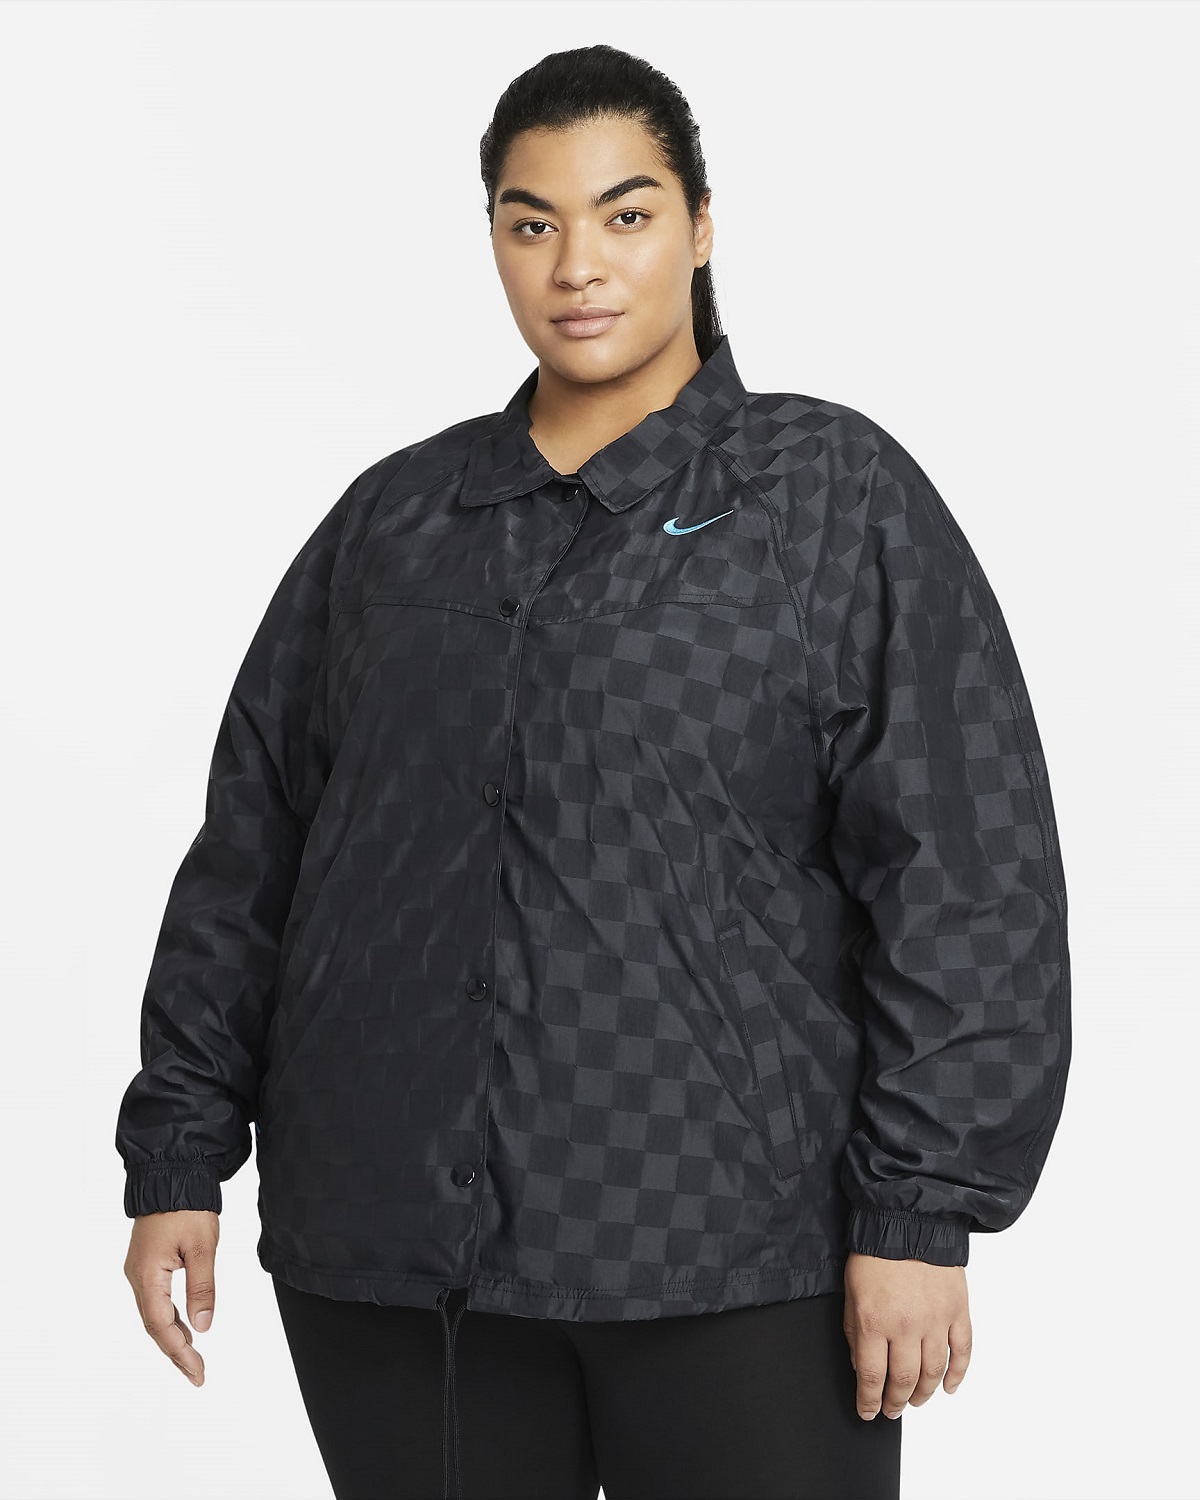 Nike Makes A Checkered Statement With Oversized Women's Coach's Jacket